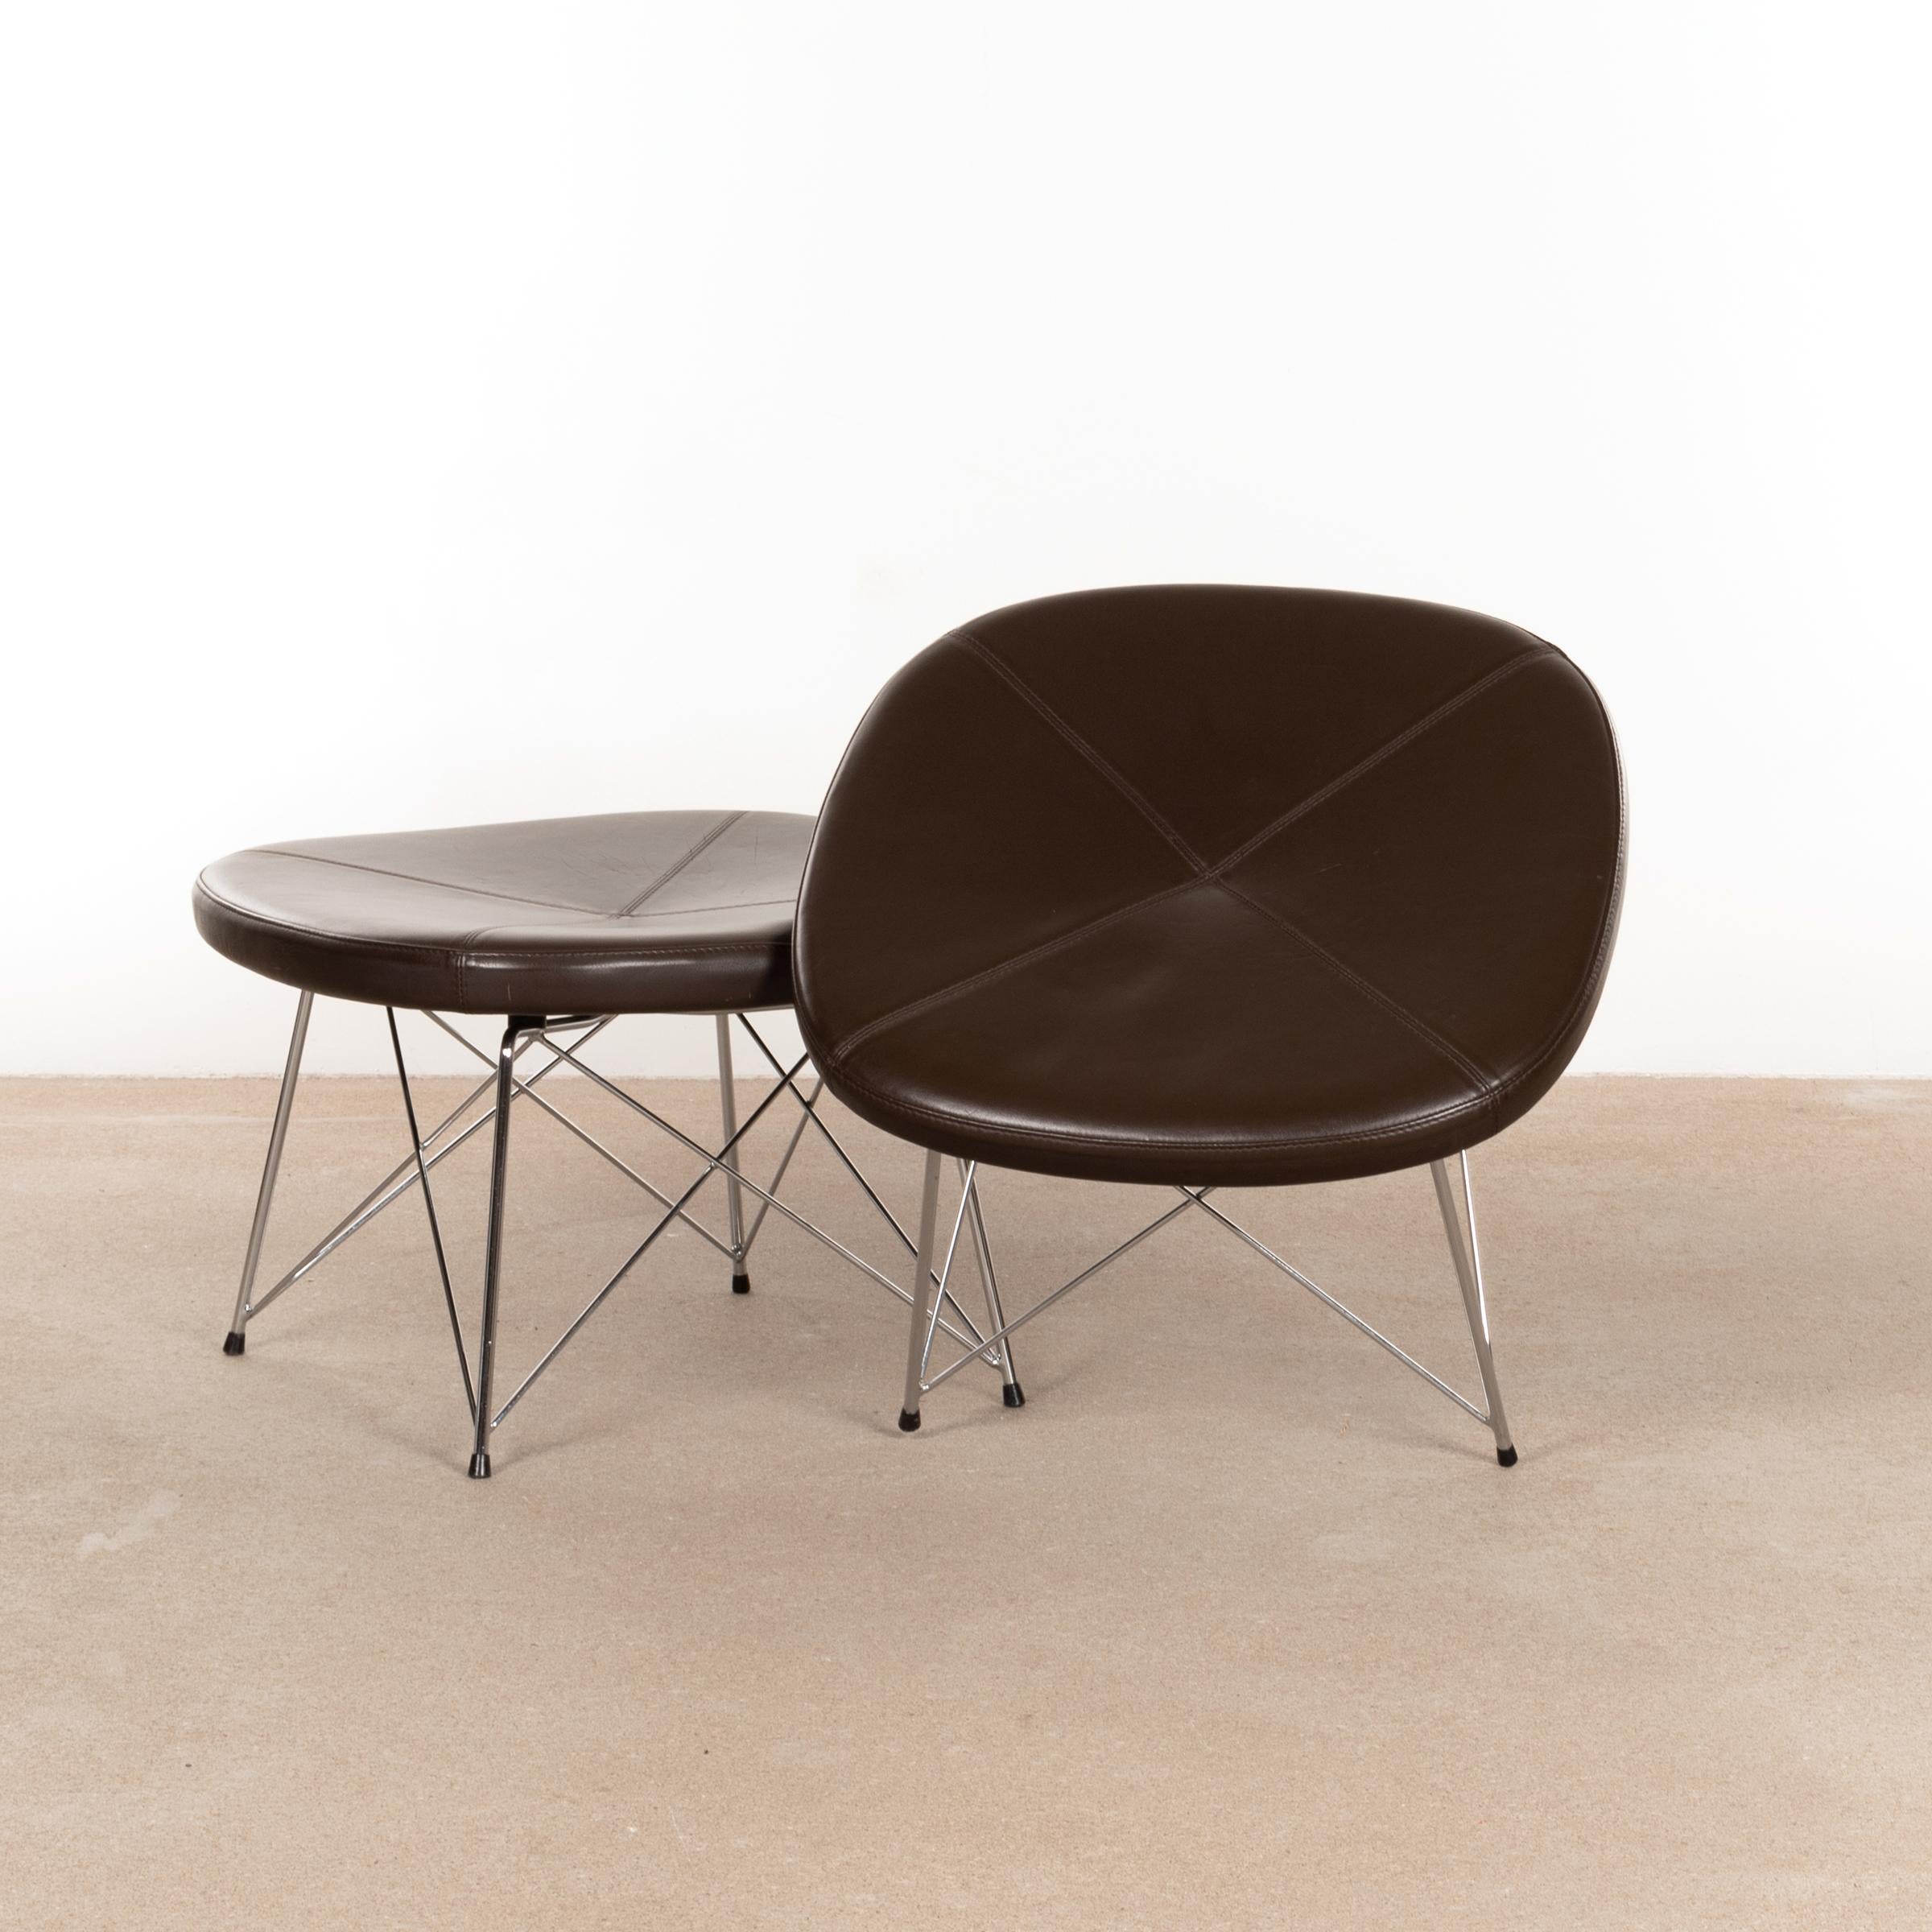 Functional stool / ottoman (Model EJ 141) designed by Anne Mette Jensen & Morten Ernst for Erik Jørgensen, Denmark. Chrome-plated rod steel bases with dark brown leather seats. Good original condition with normal and light traces of use.